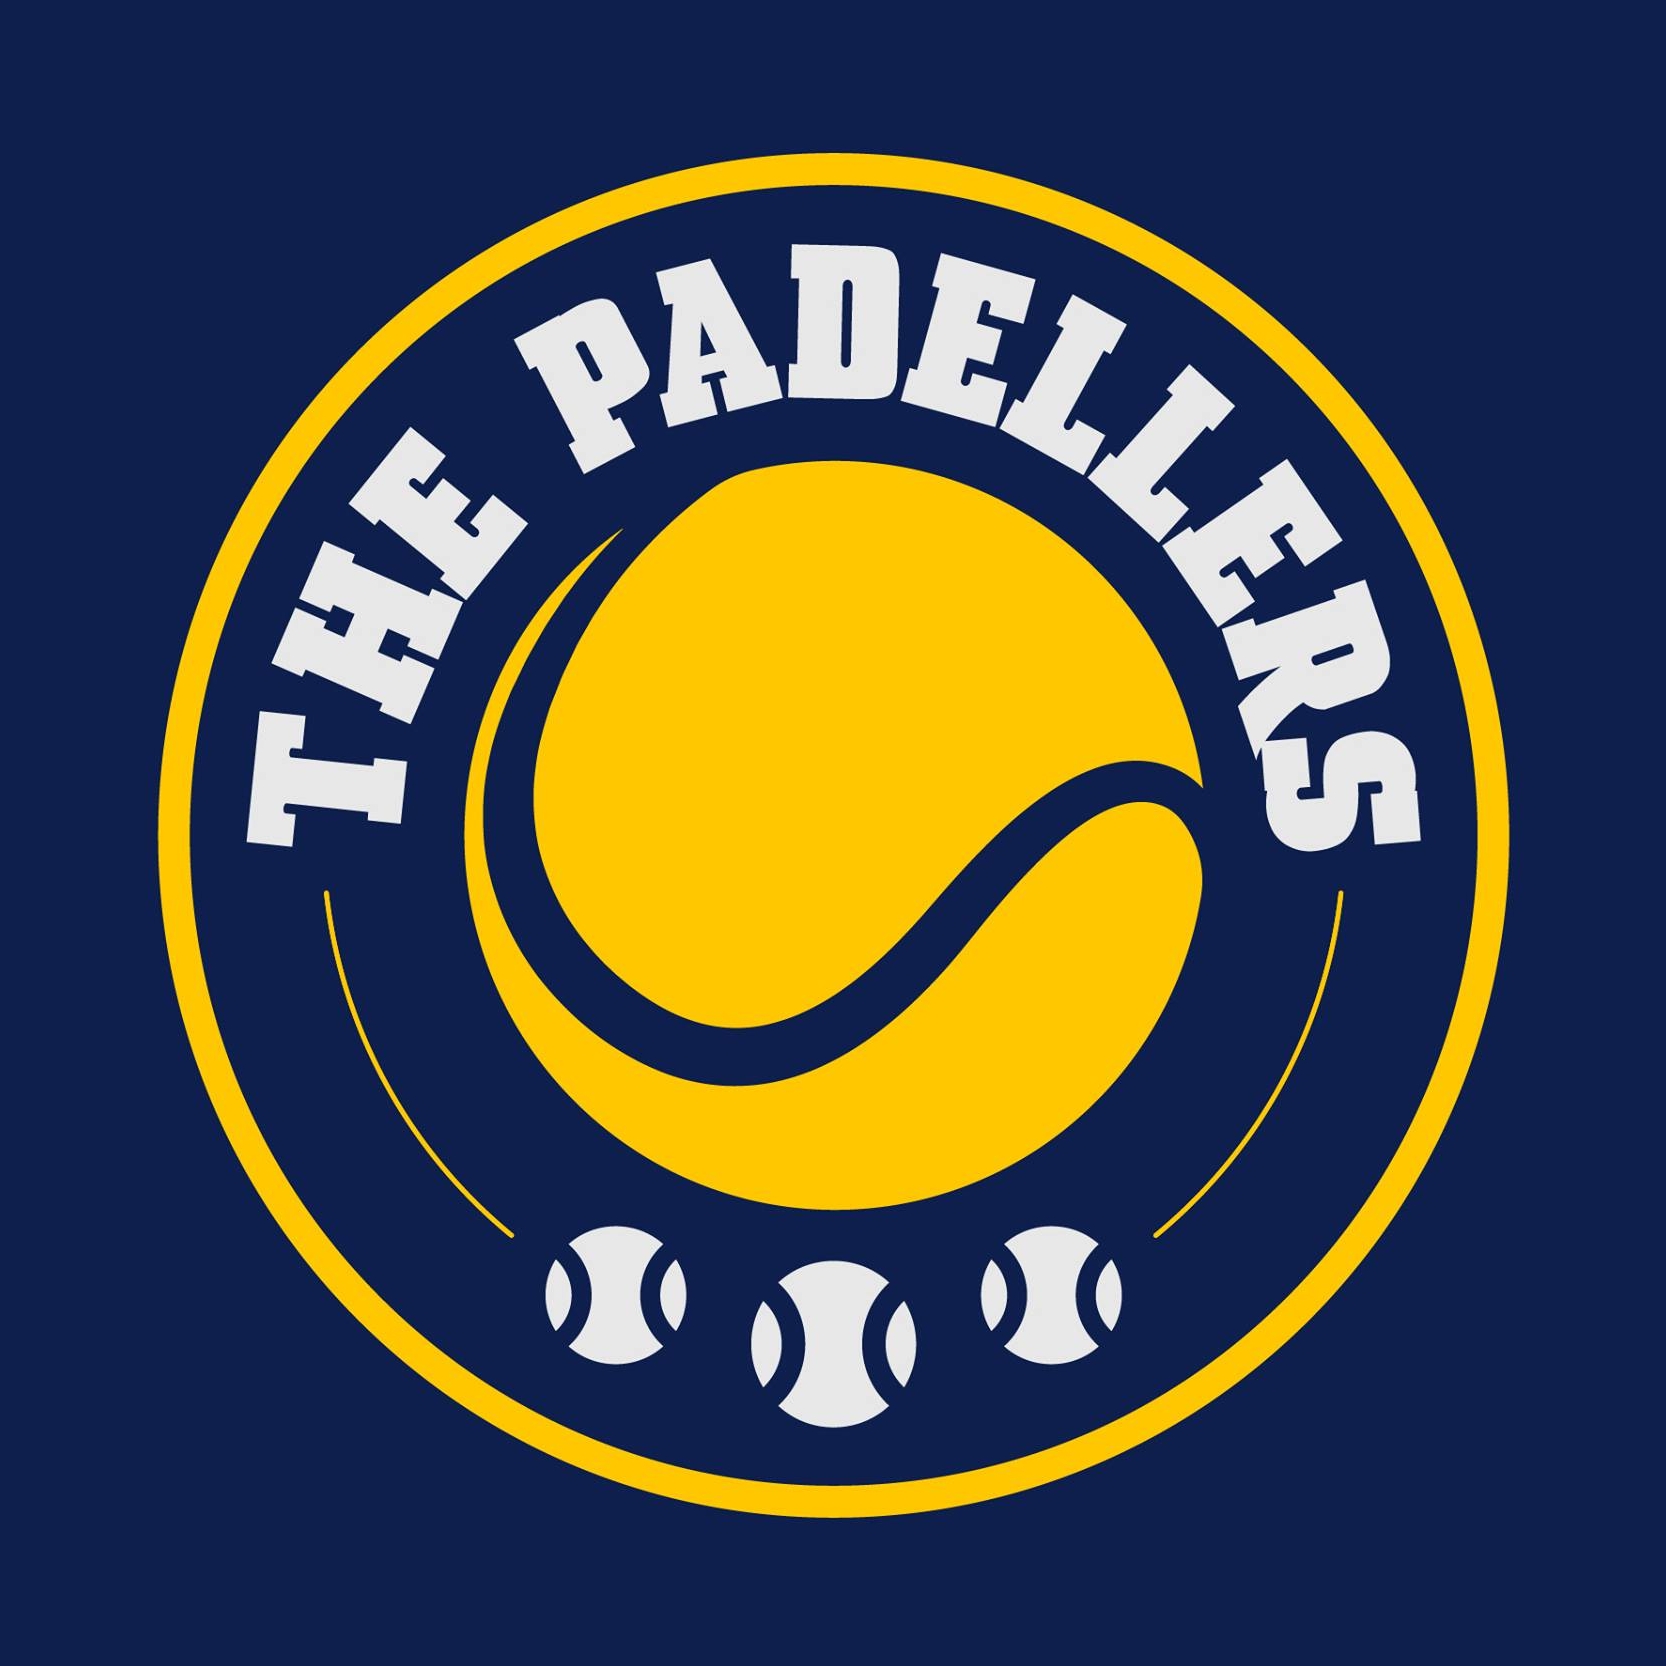 Profile image of venue The Padellers - Uitgeest